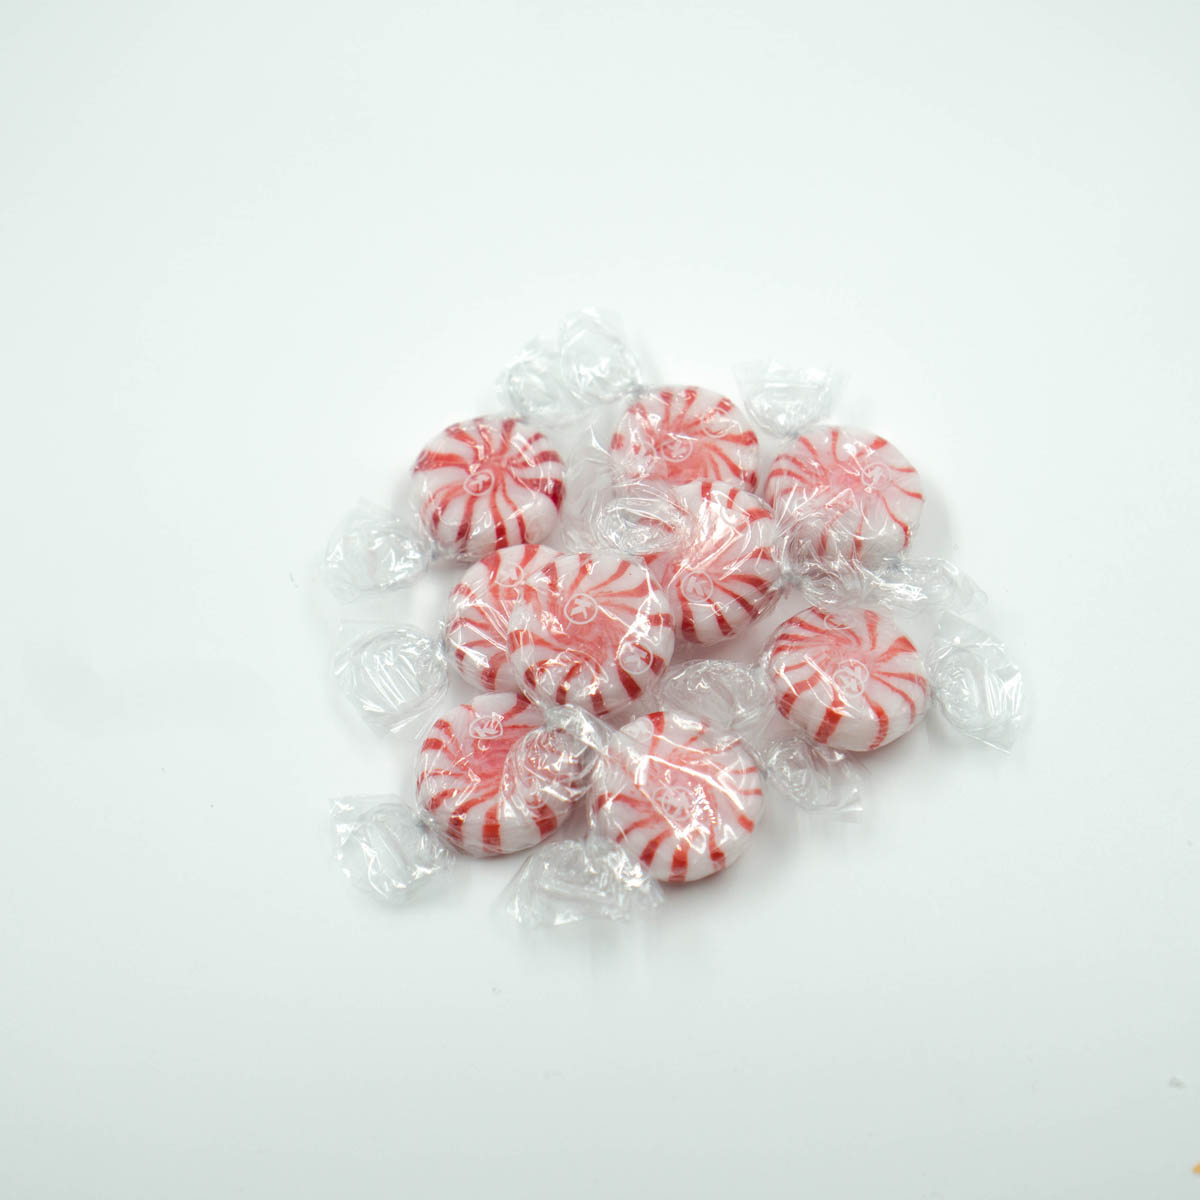 Red Striped Mint Candy Wrapped